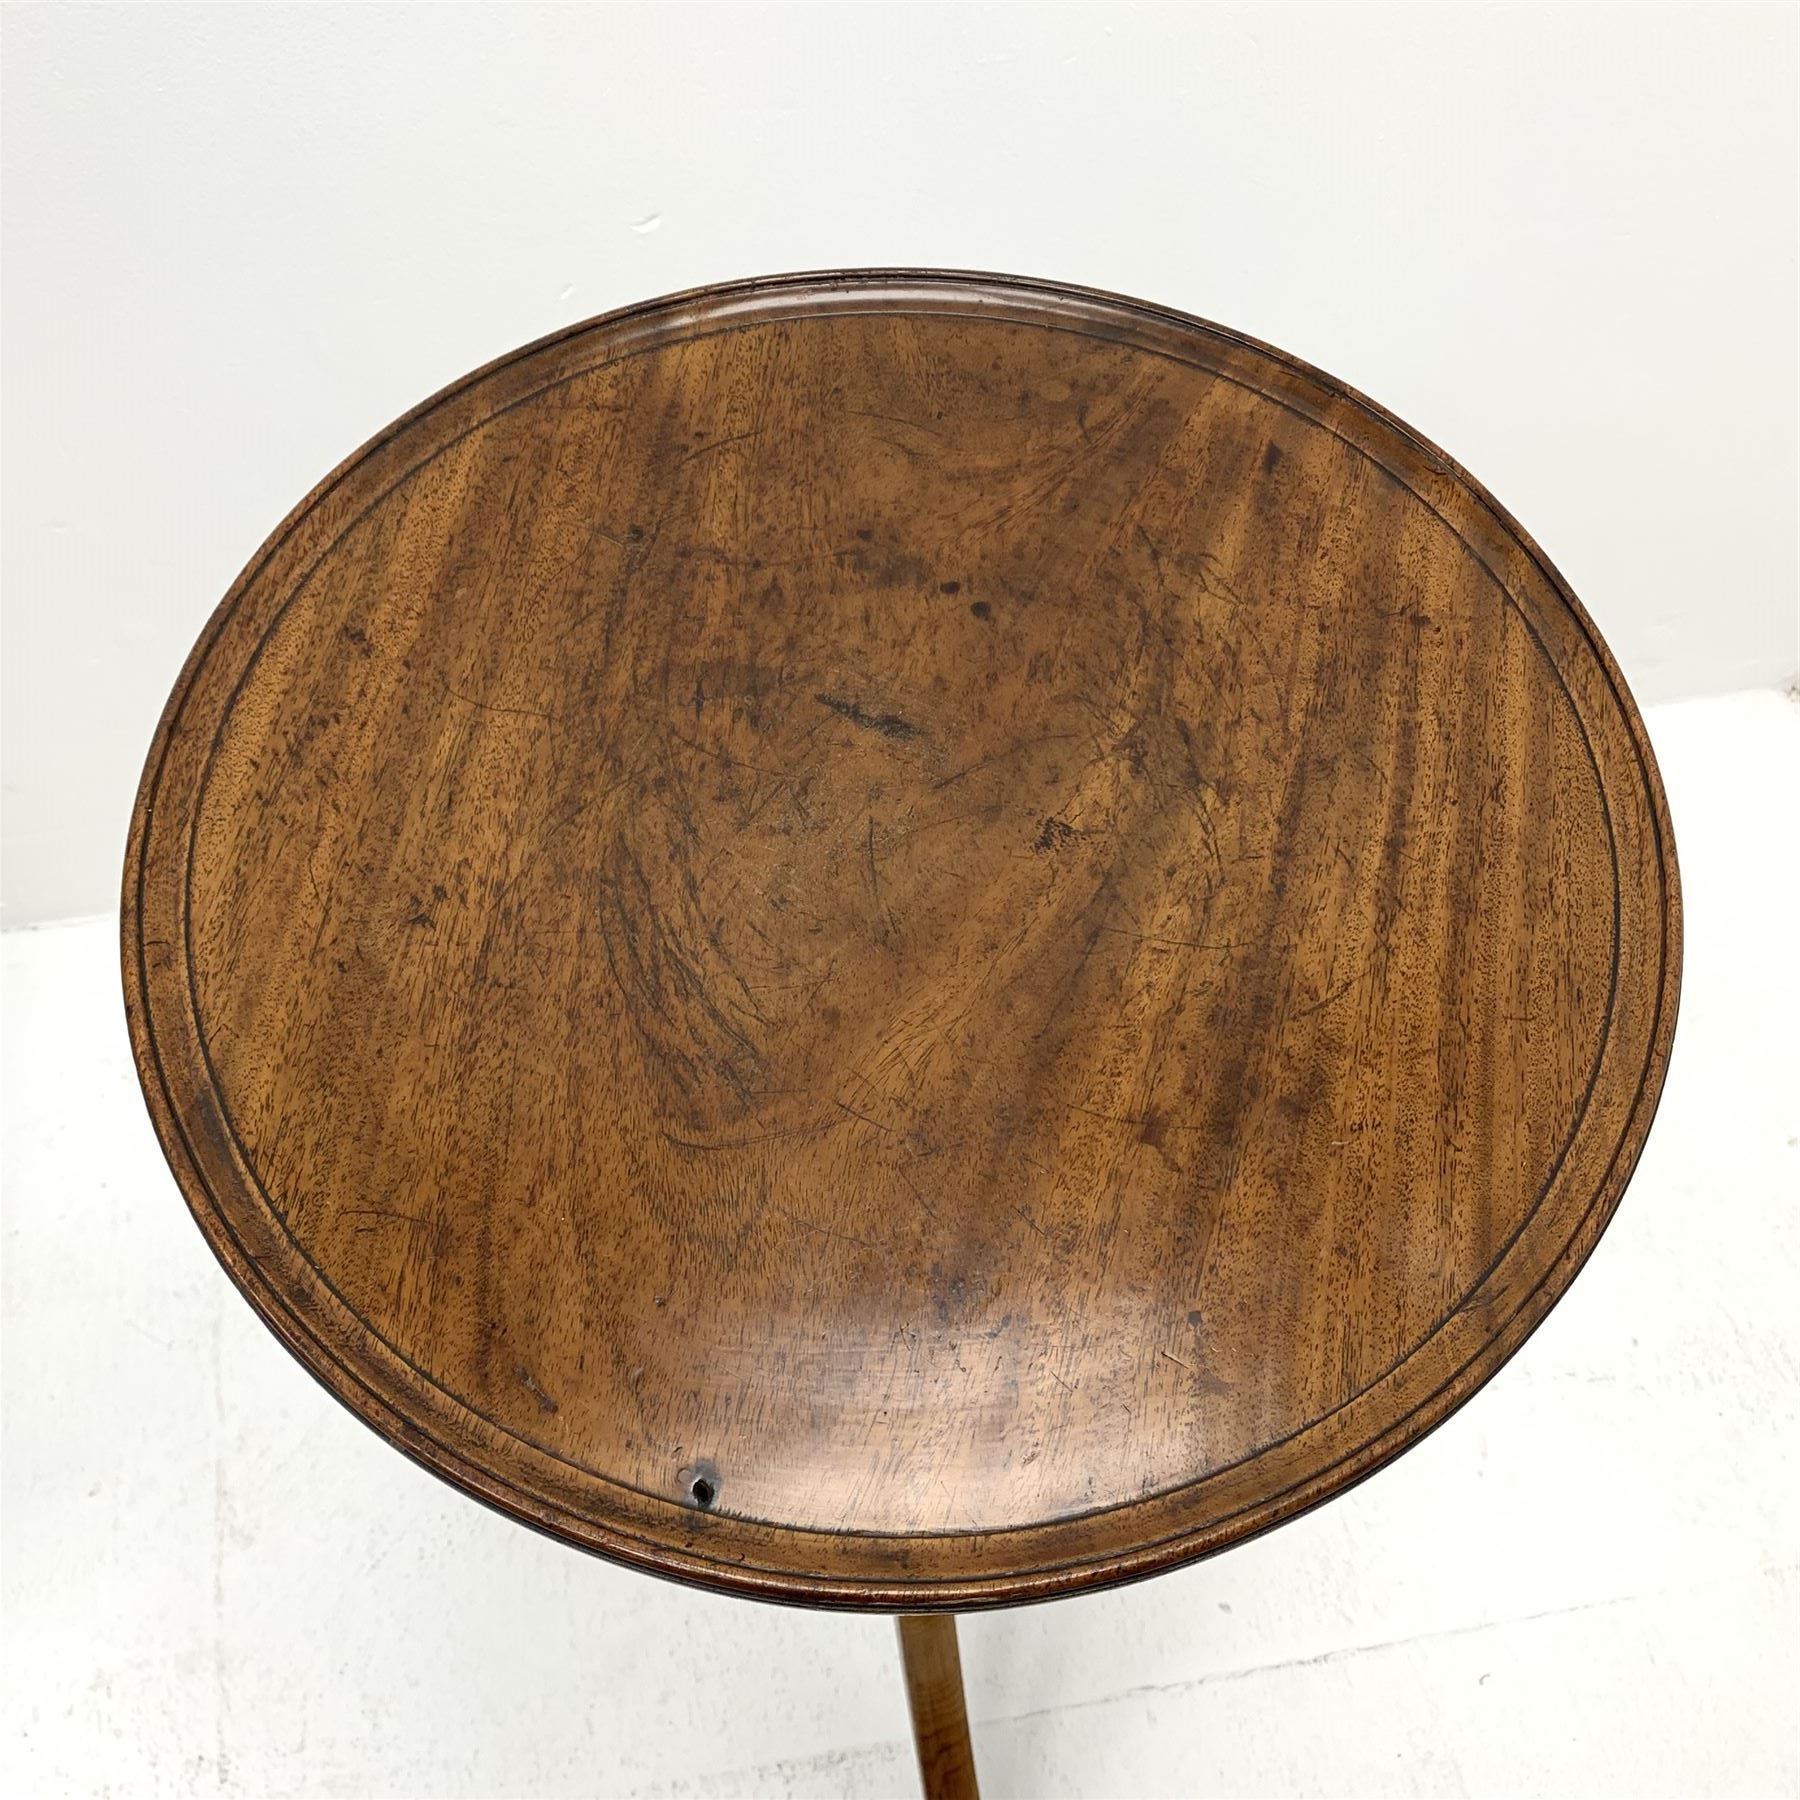 Early 19th century tripod table - Image 2 of 4